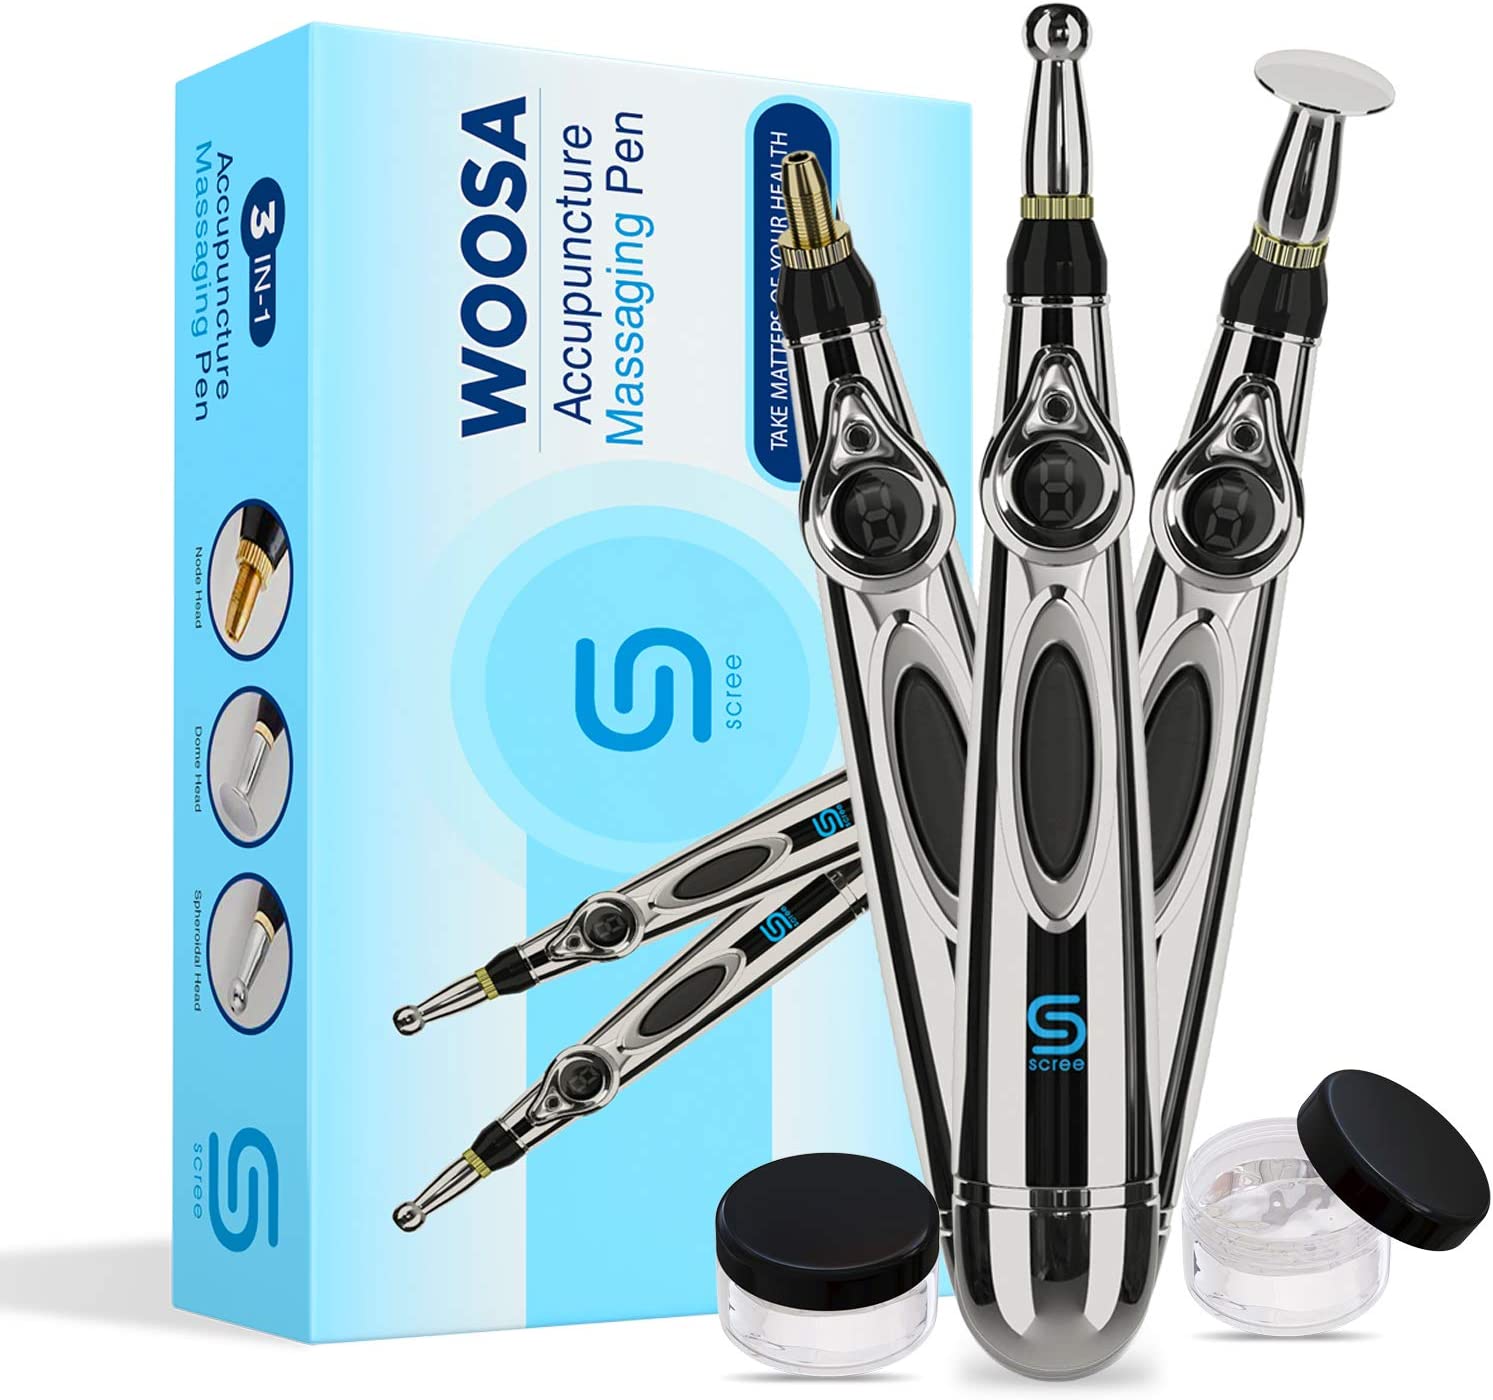  6. Scree 3-in-1 Electronic Acupuncture Pen 